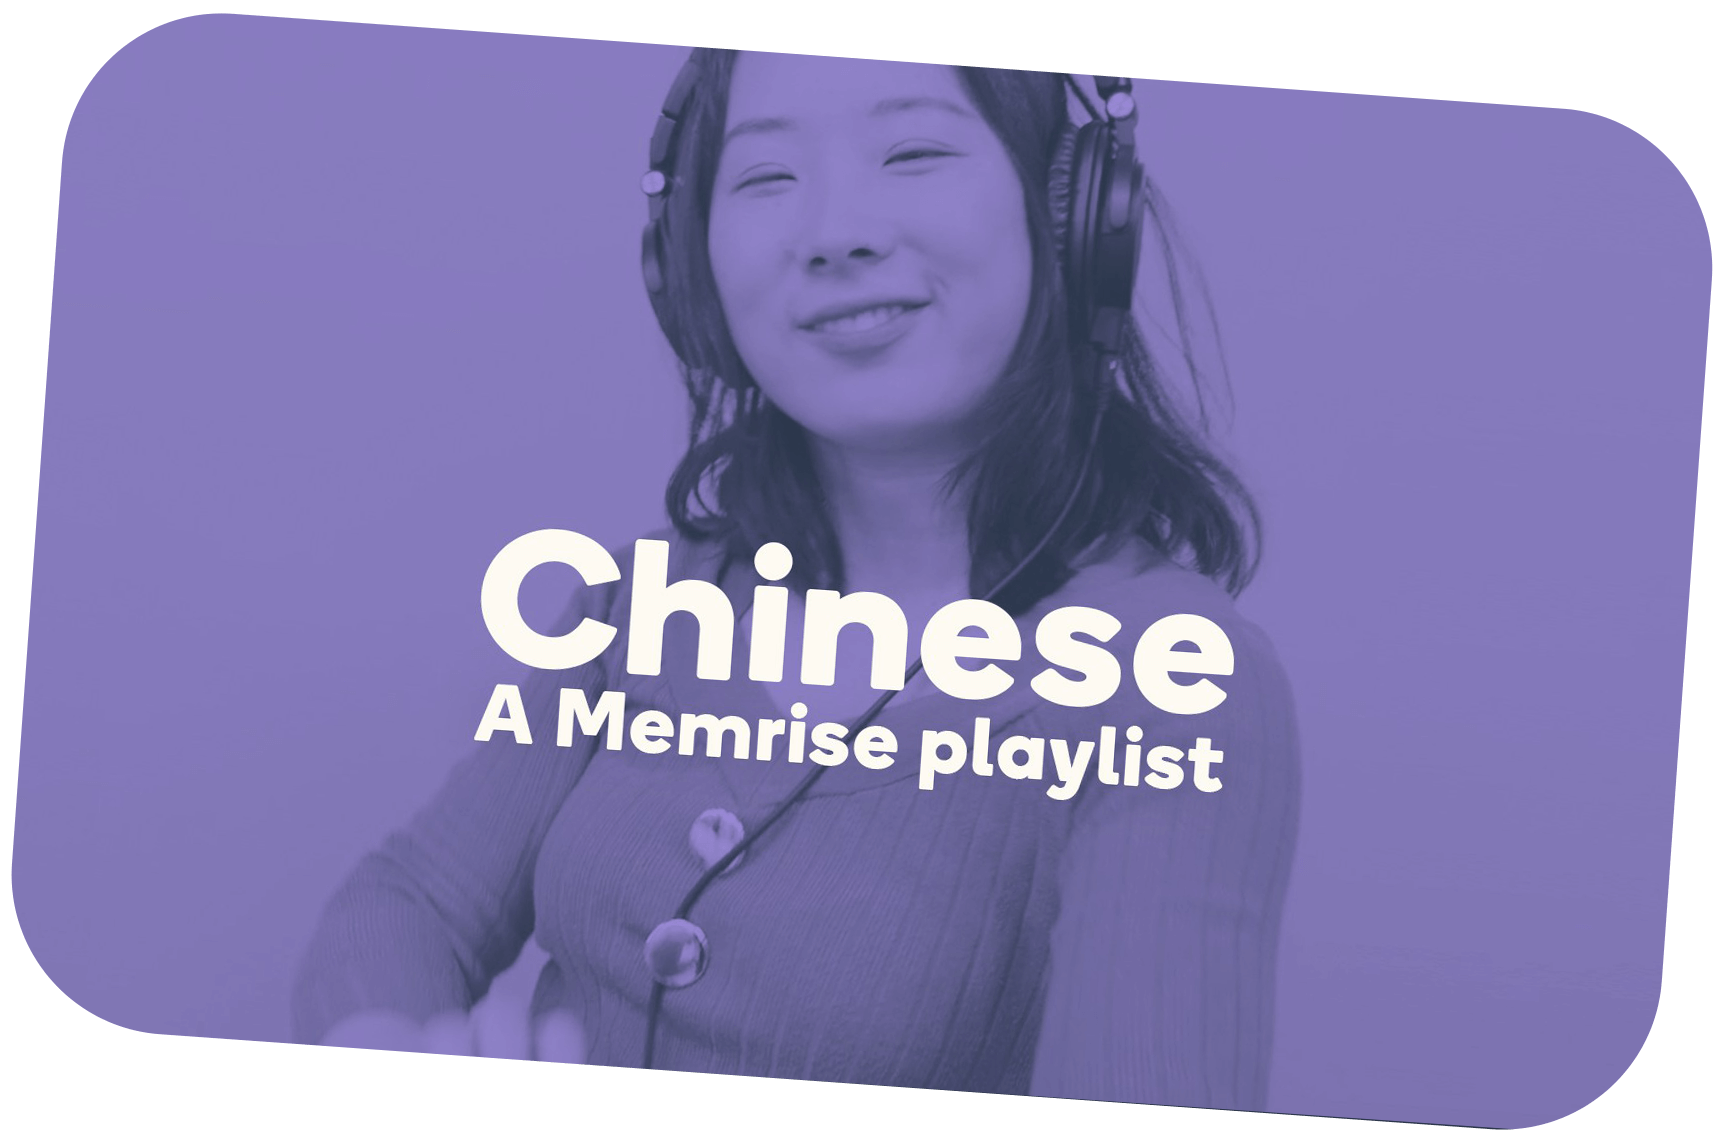 315 Chinese Songs To Suit Every Mood